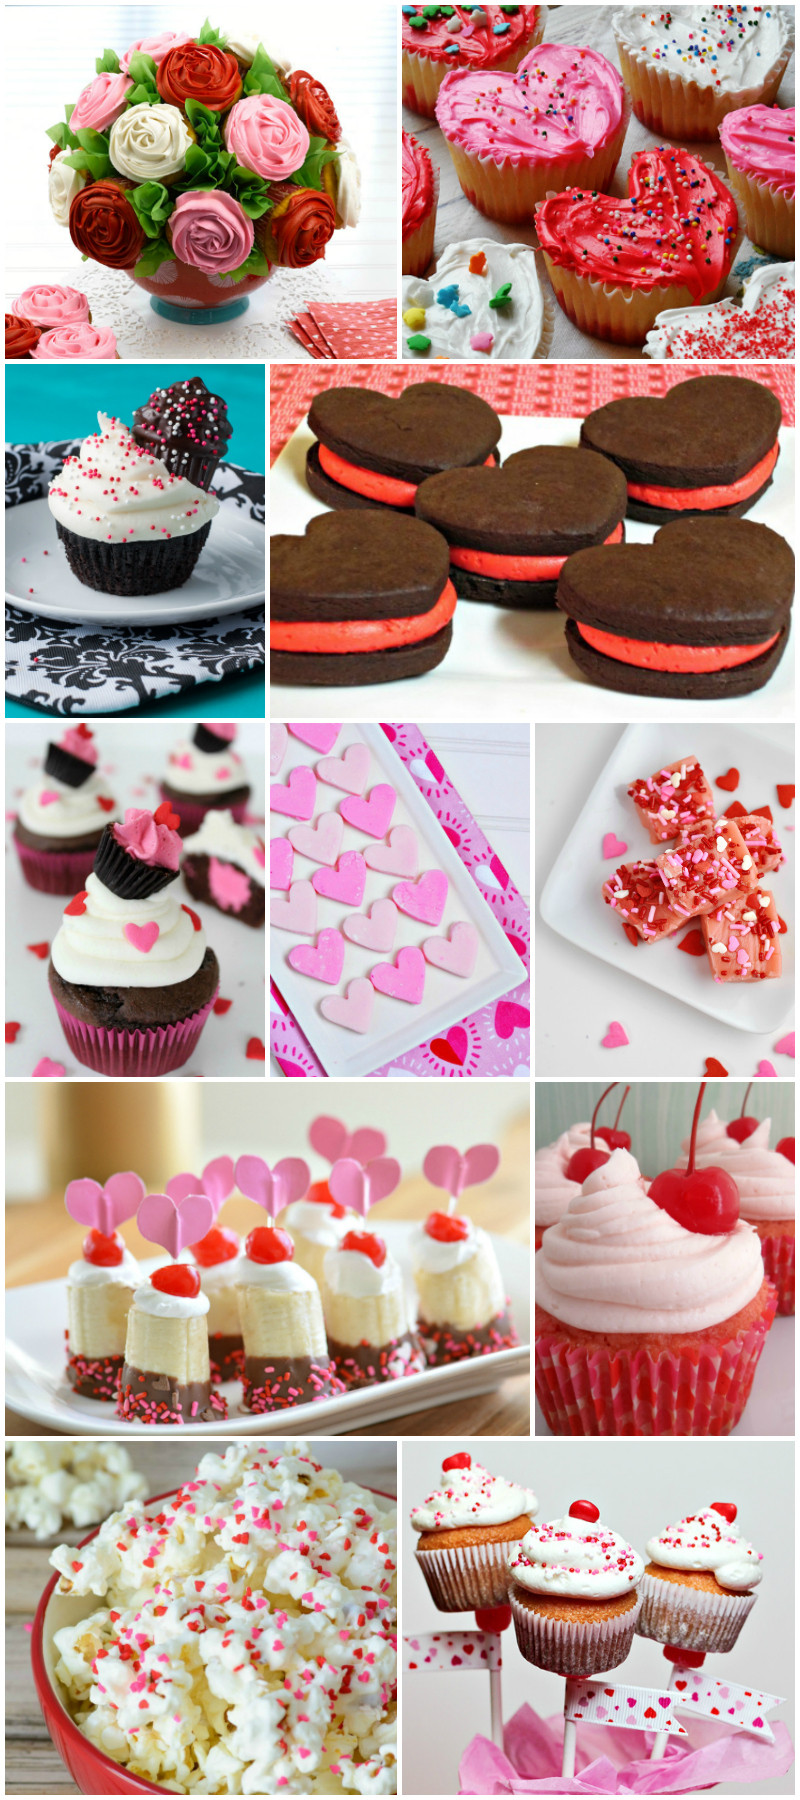 Desserts For Valentines Day
 50 Cute and Delicious Valentine’s Day Dessert Recipes